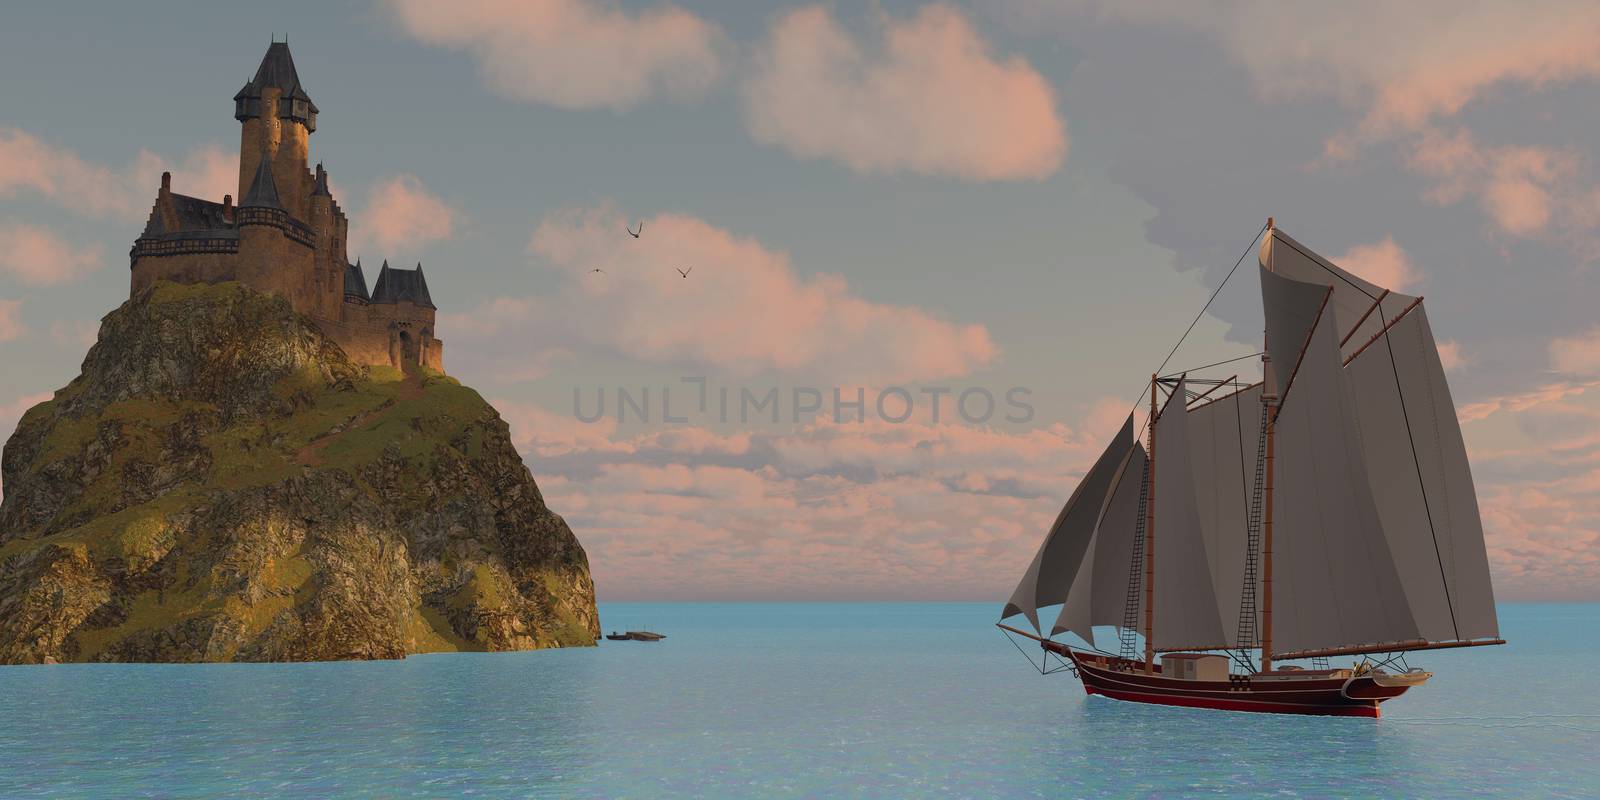 A lake schooner sails to an island that has a castle on a steep cliff on a beautiful day.